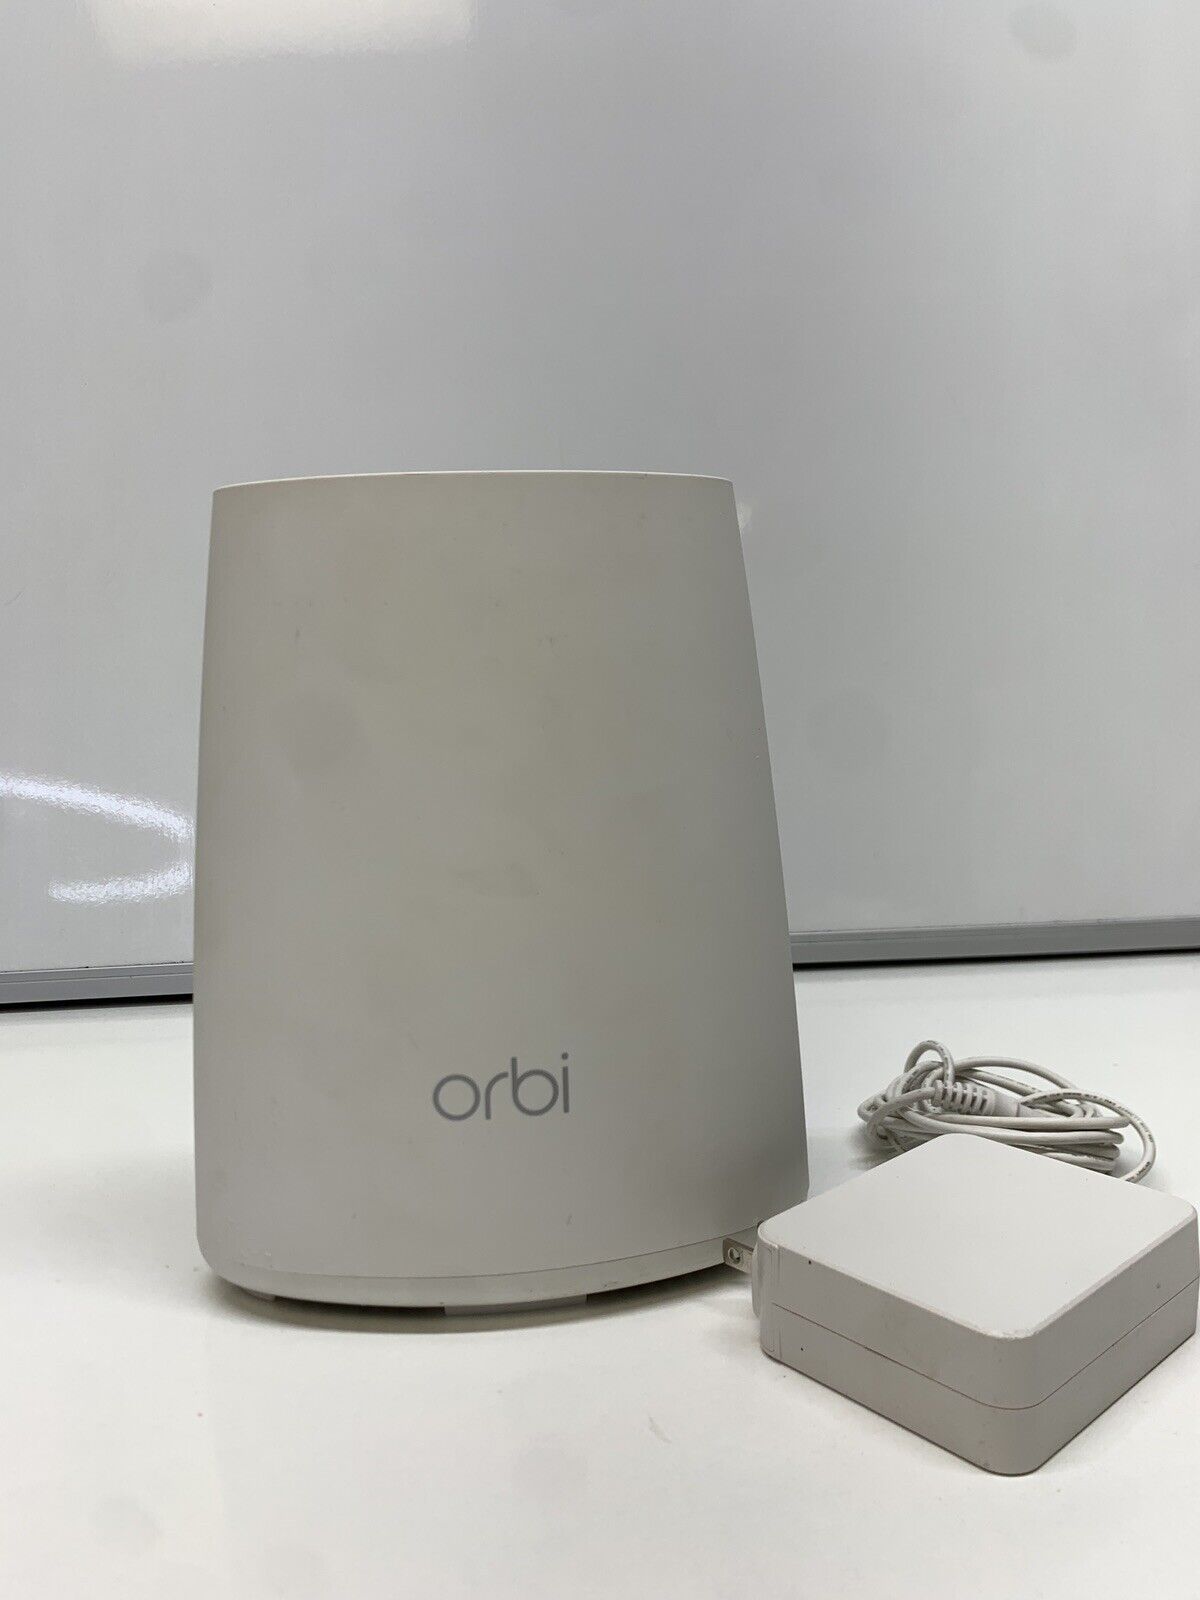 NETGEAR Orbi Router RBR40 Tri-Band WiFi wireless router 